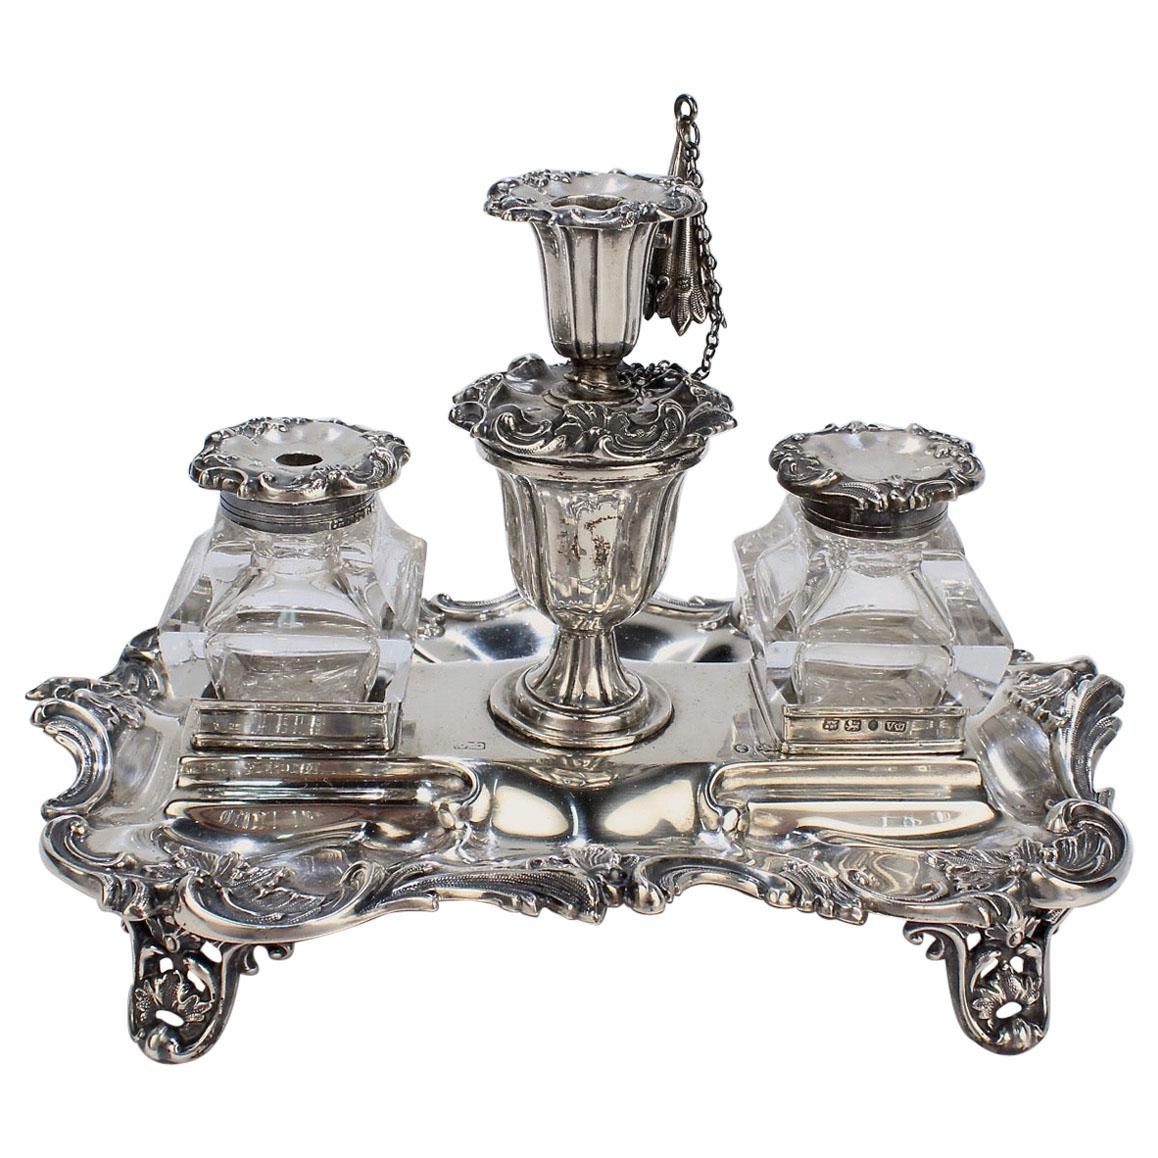 Exceptional Early Victorian English Sterling Silver Inkstand by Henry Wilkinson